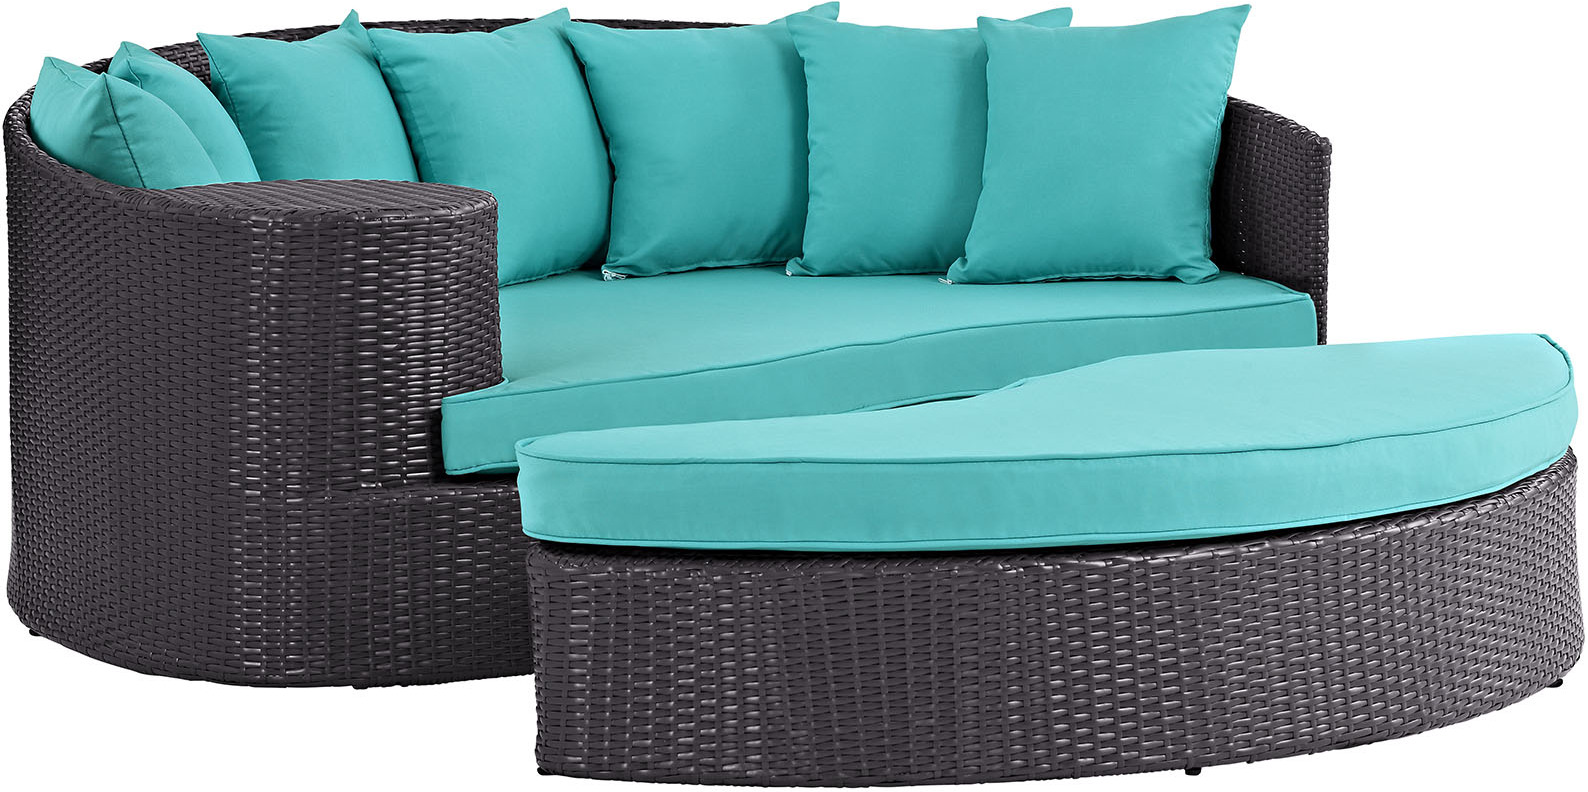 Modway Siesta Wicker Rattan Outdoor Patio Canopy Daybed in Espresso Turquoise 